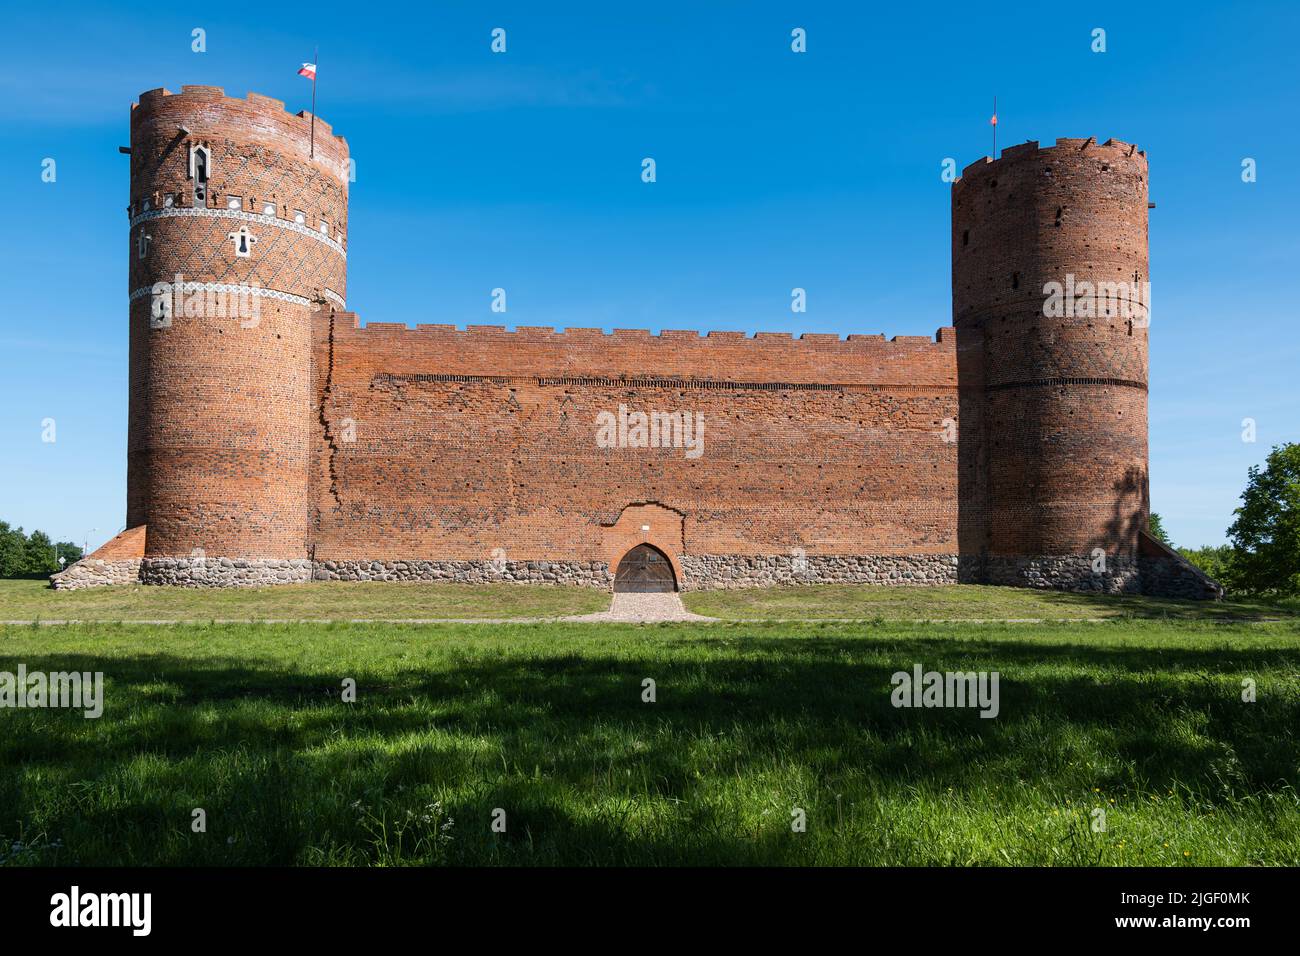 Castle of the Masovian Dukes in Ciechanow, Poland, built by the Masovian Duke Siemowit III, dating back to the 14th century. Stock Photo